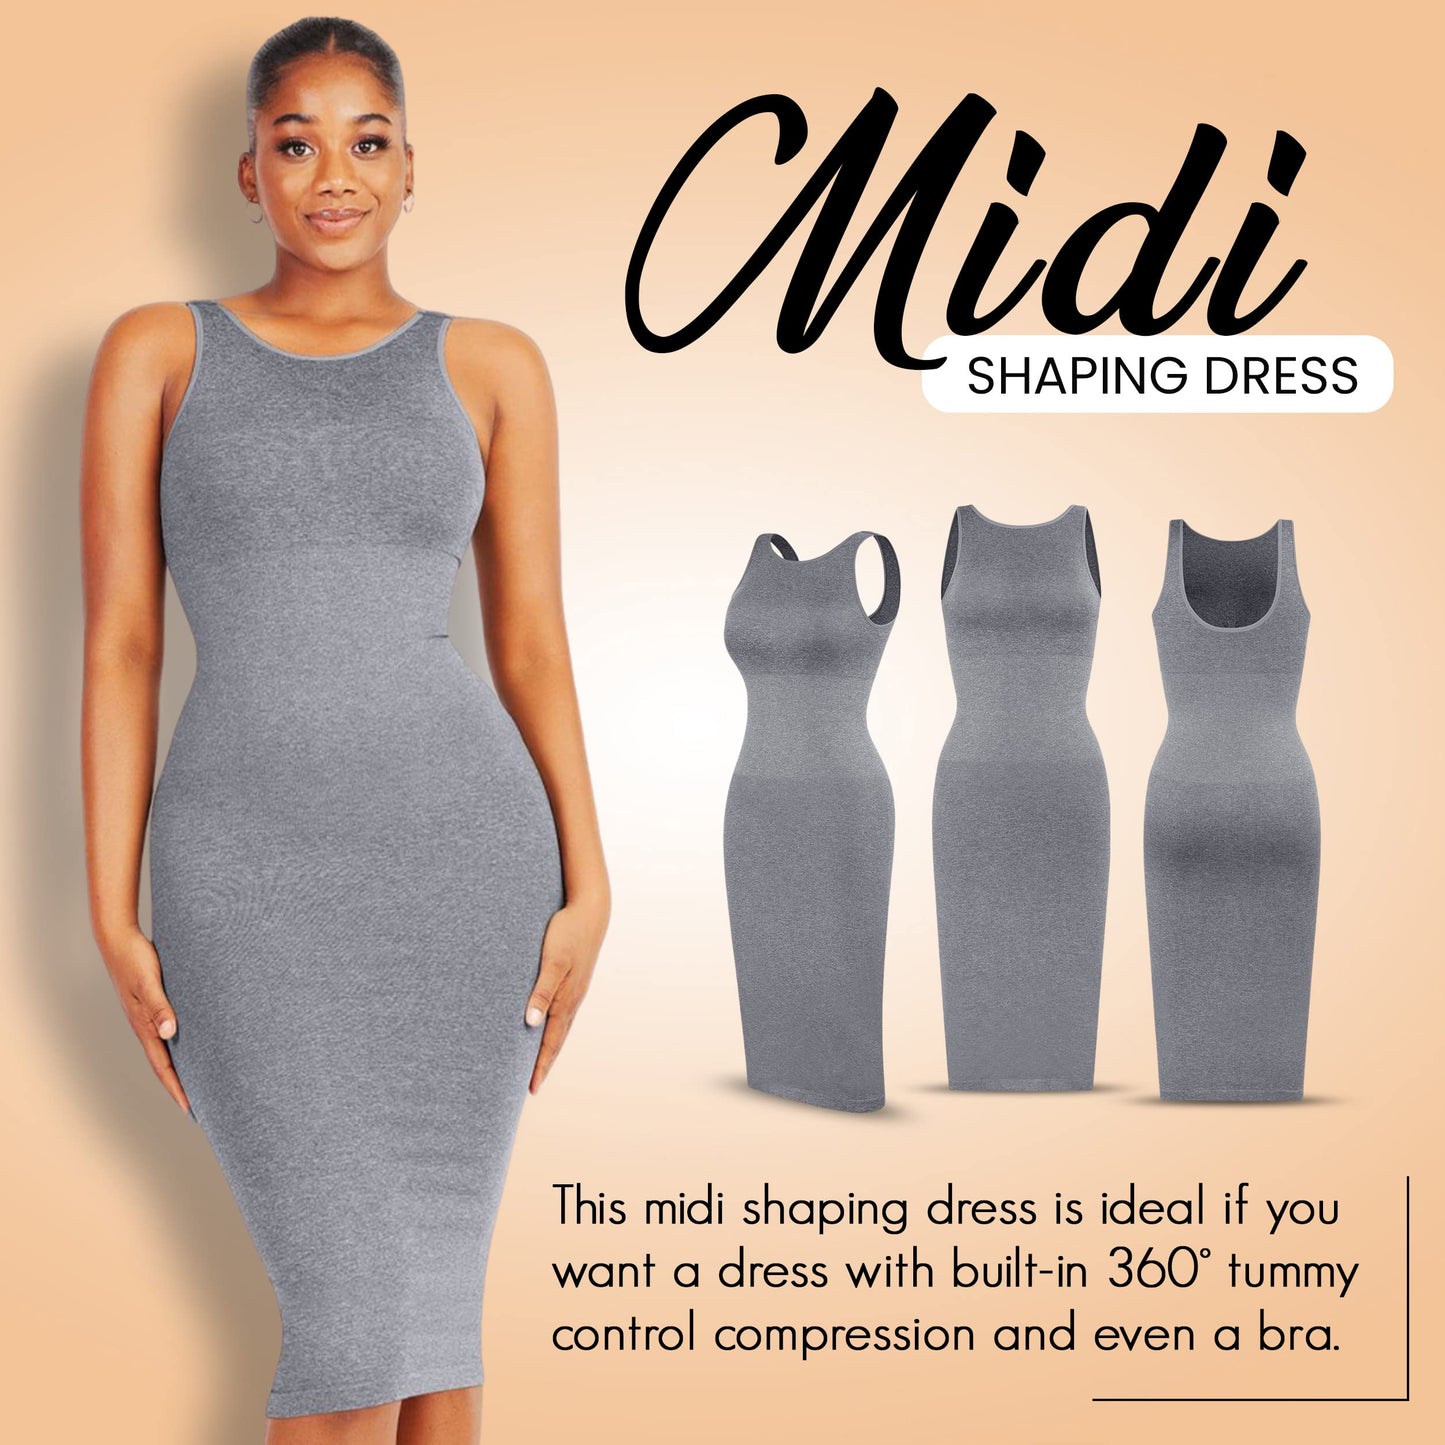 Introducing The Slimming, Shaping Slip Dress That Will Change Your Lif